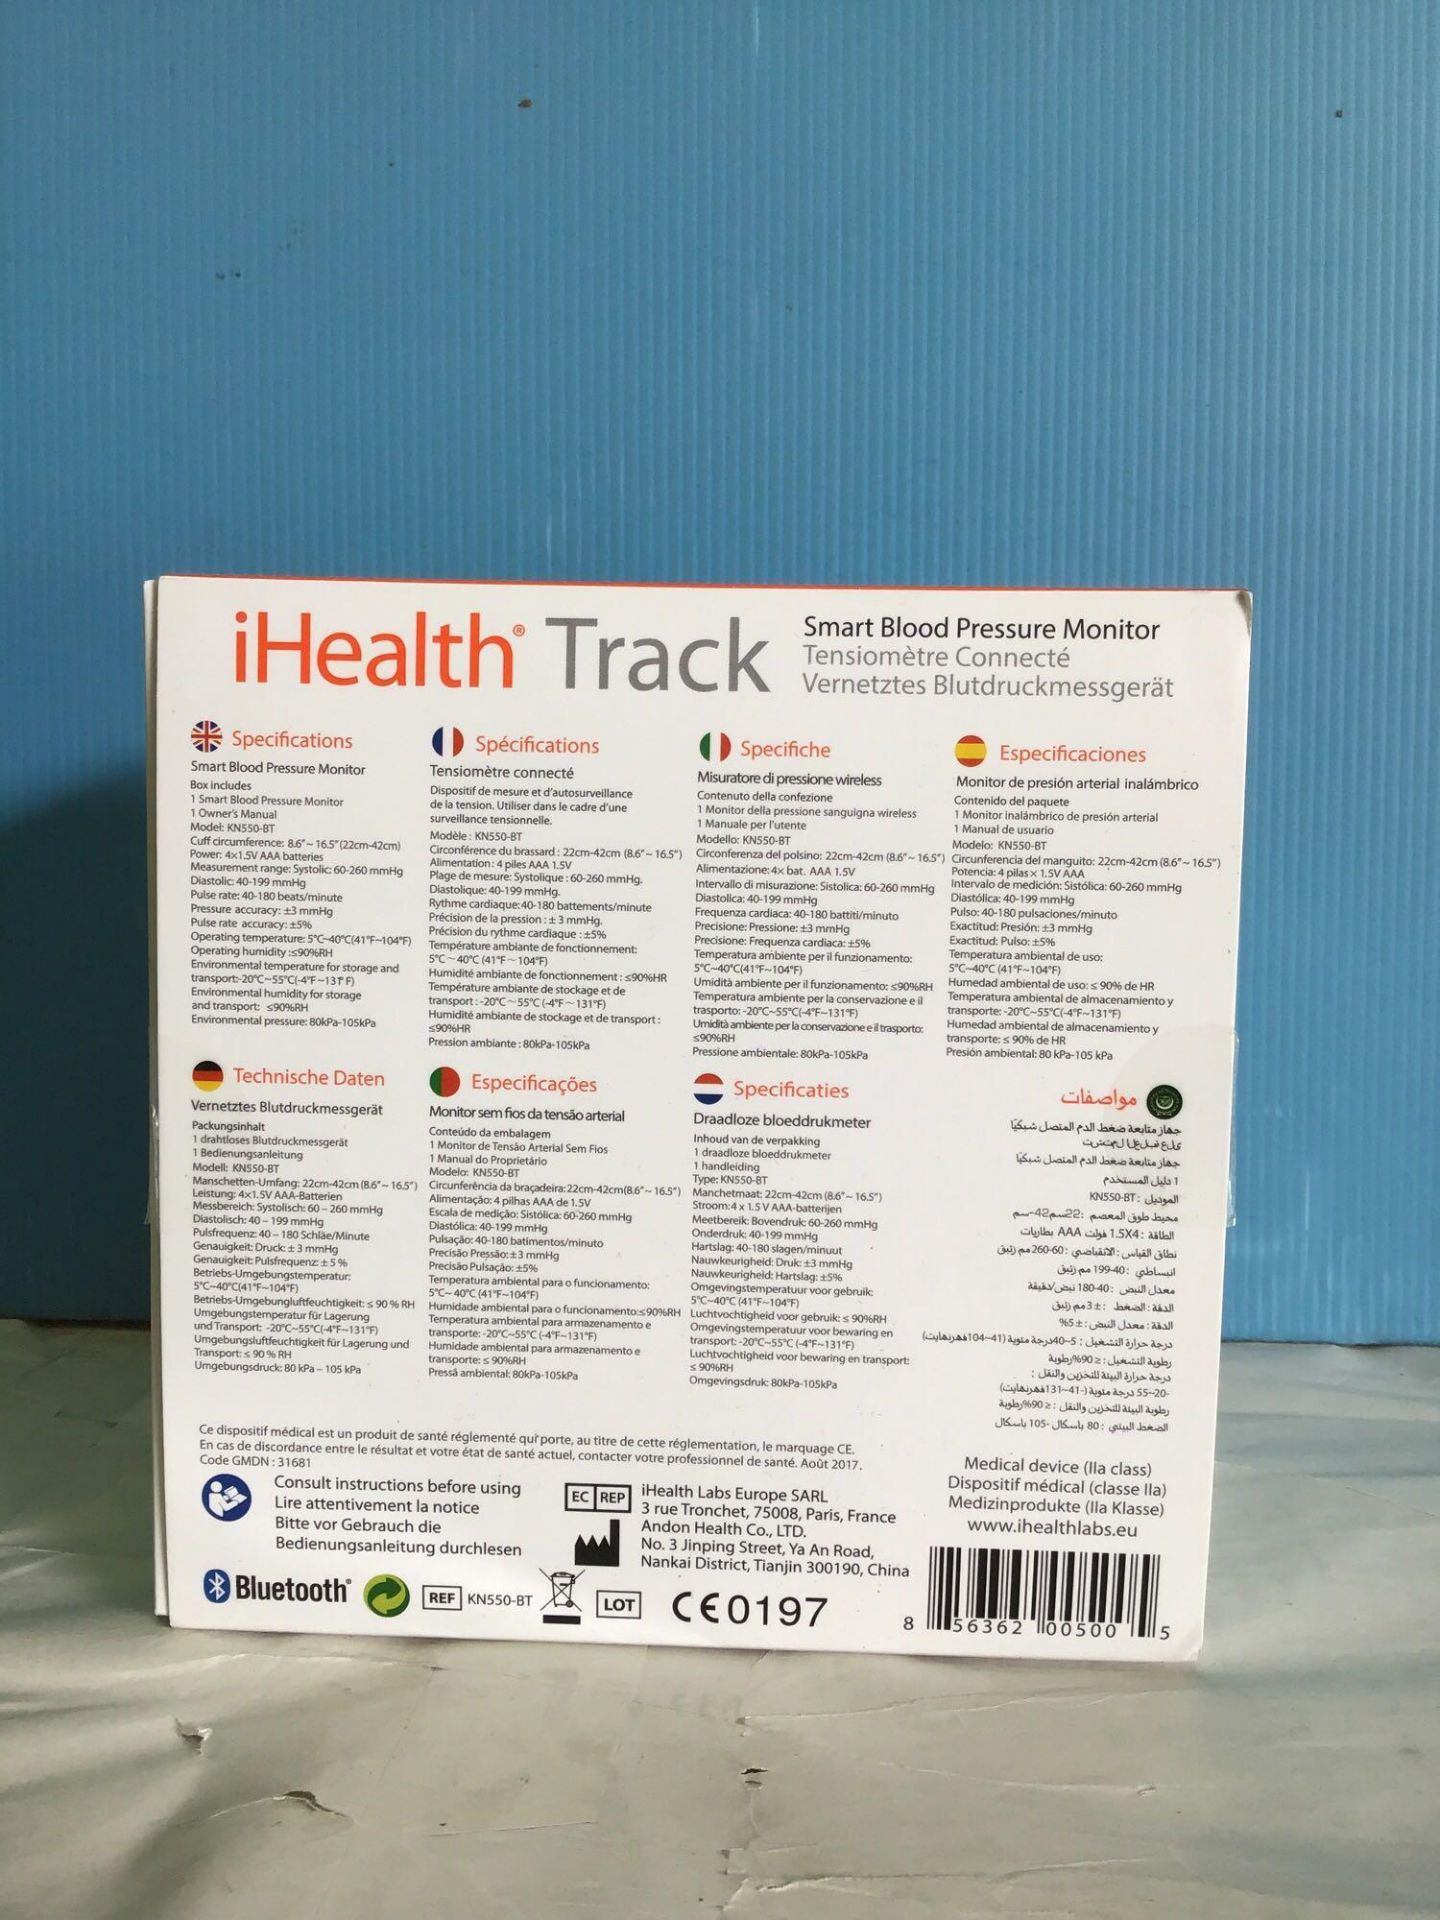 Connected Blood Pressure Monitor – iHealth Track - Image 3 of 5